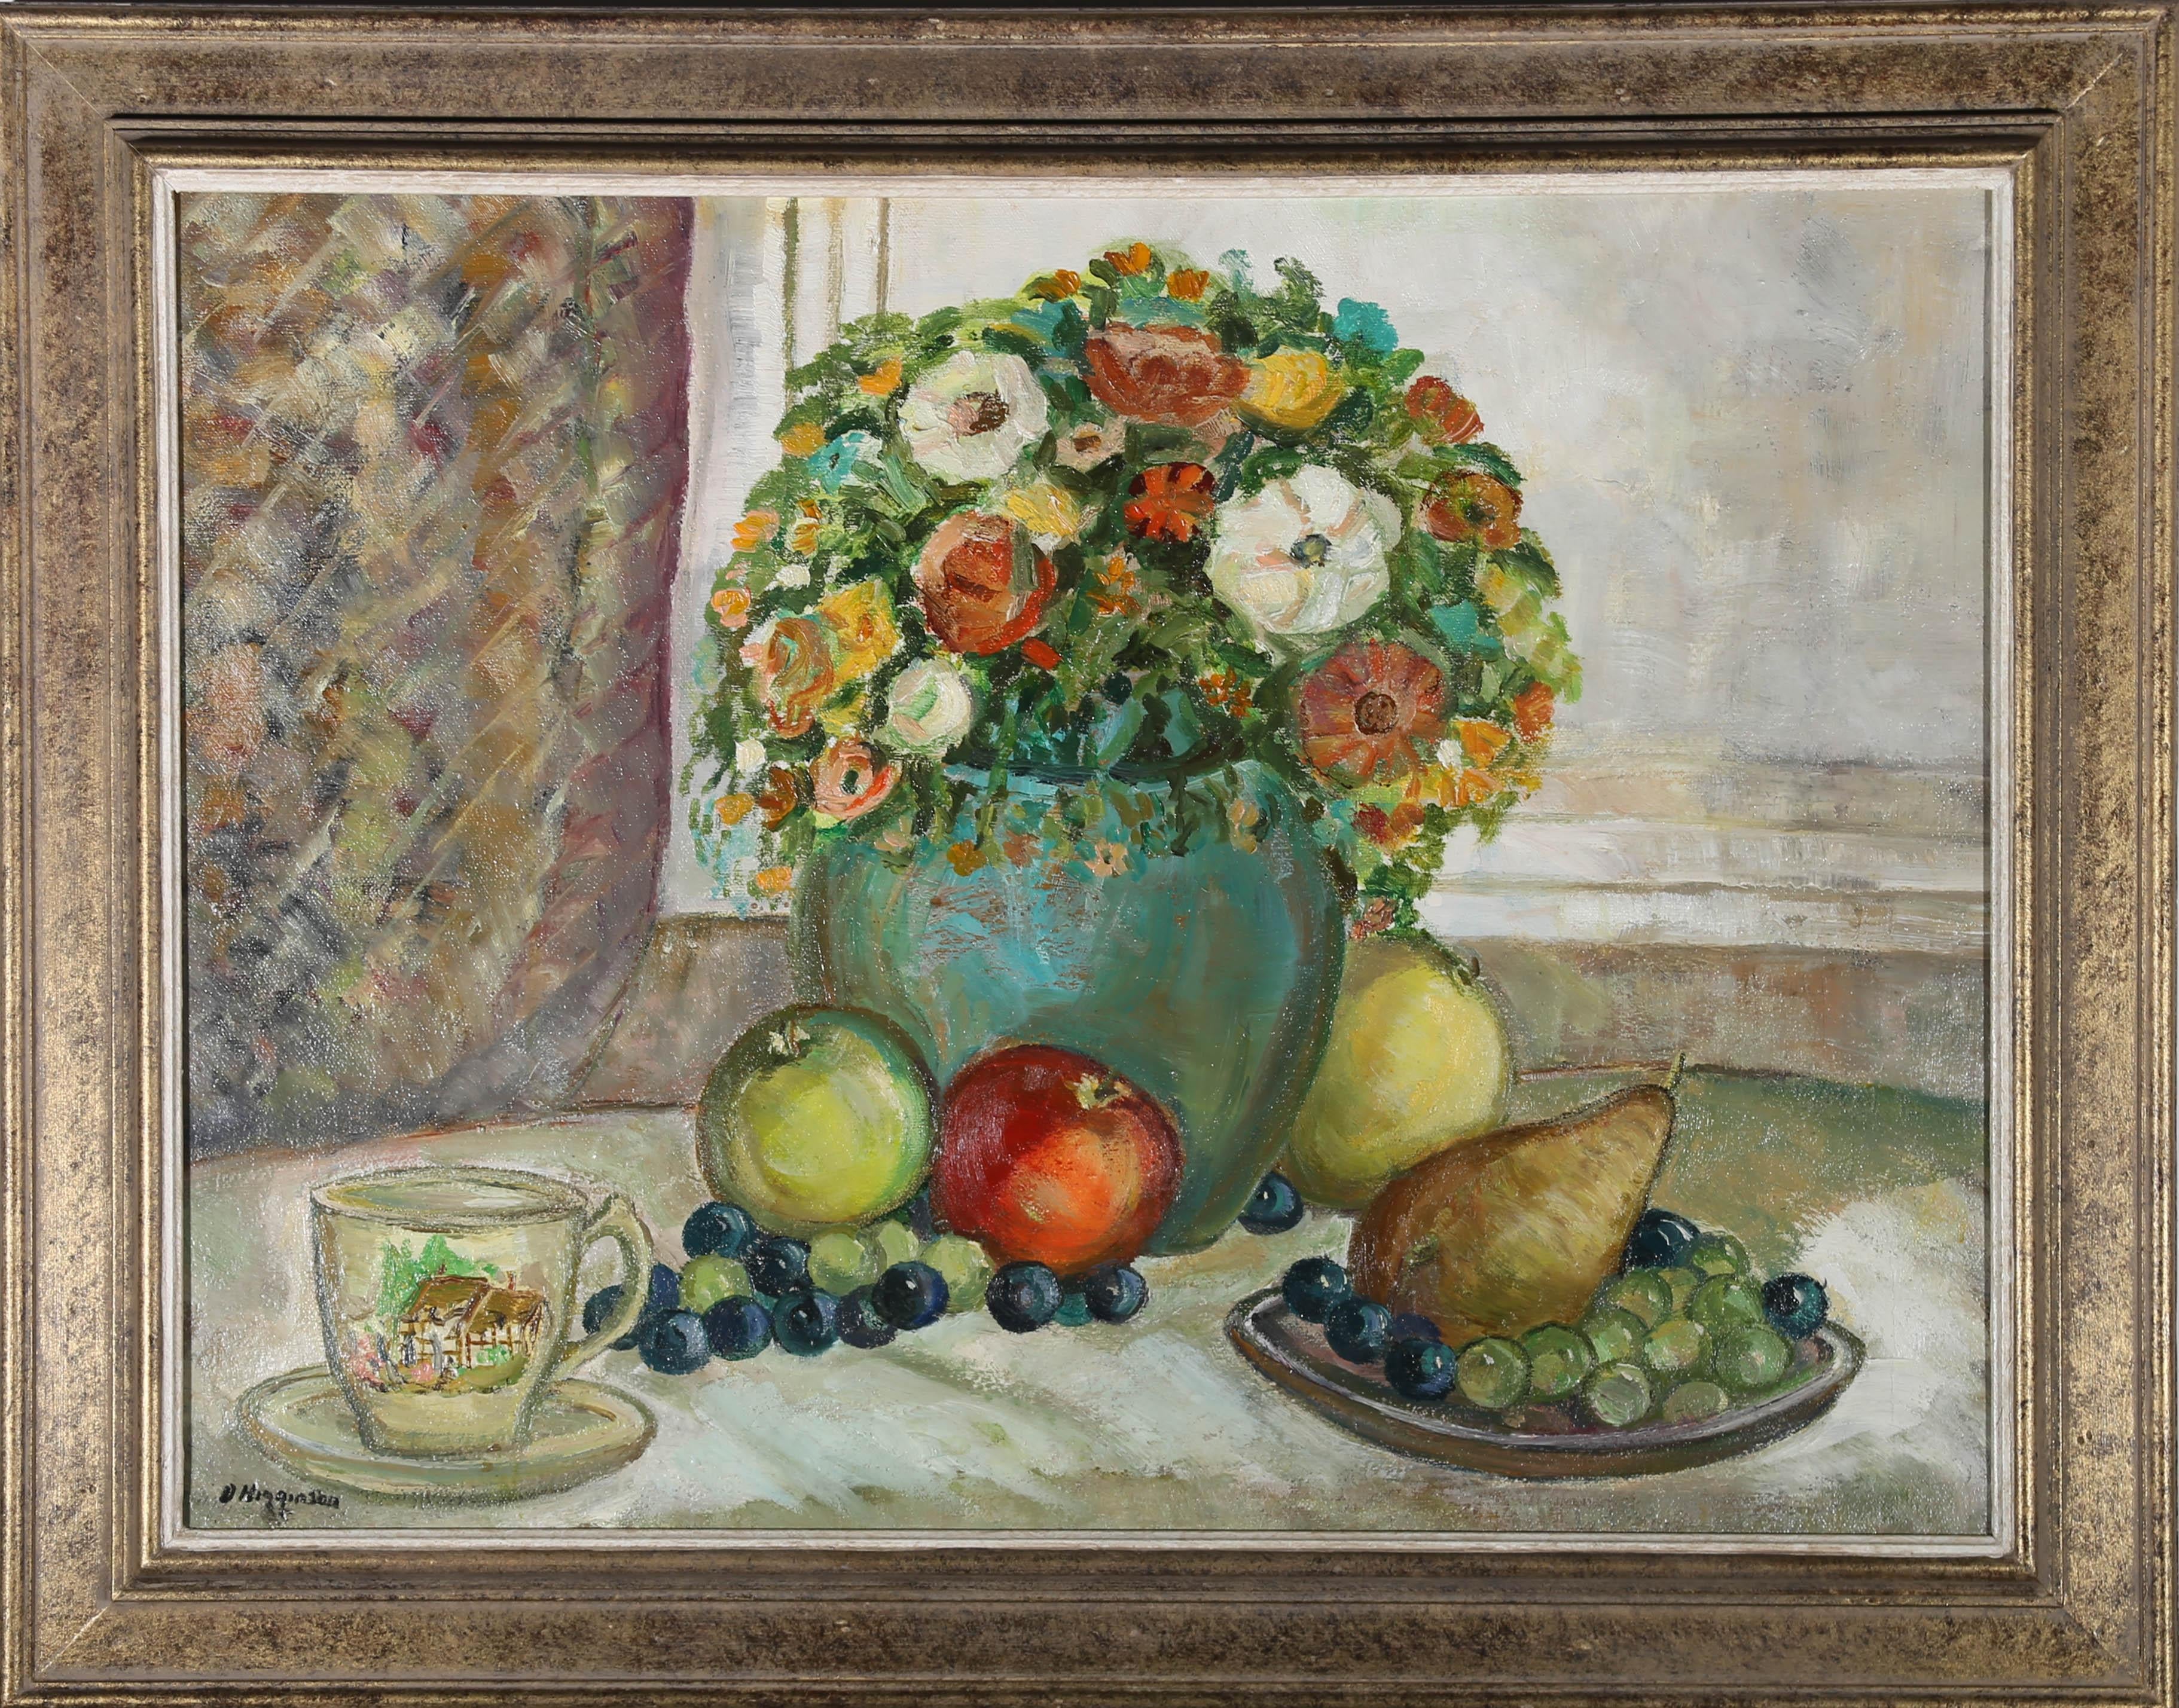 A charming impressionistic study of a vase of flowers and fruit placed before a window. Signed to the lower right. Presented in a gilt frame with a white painted slip. On canvas on stretchers.
